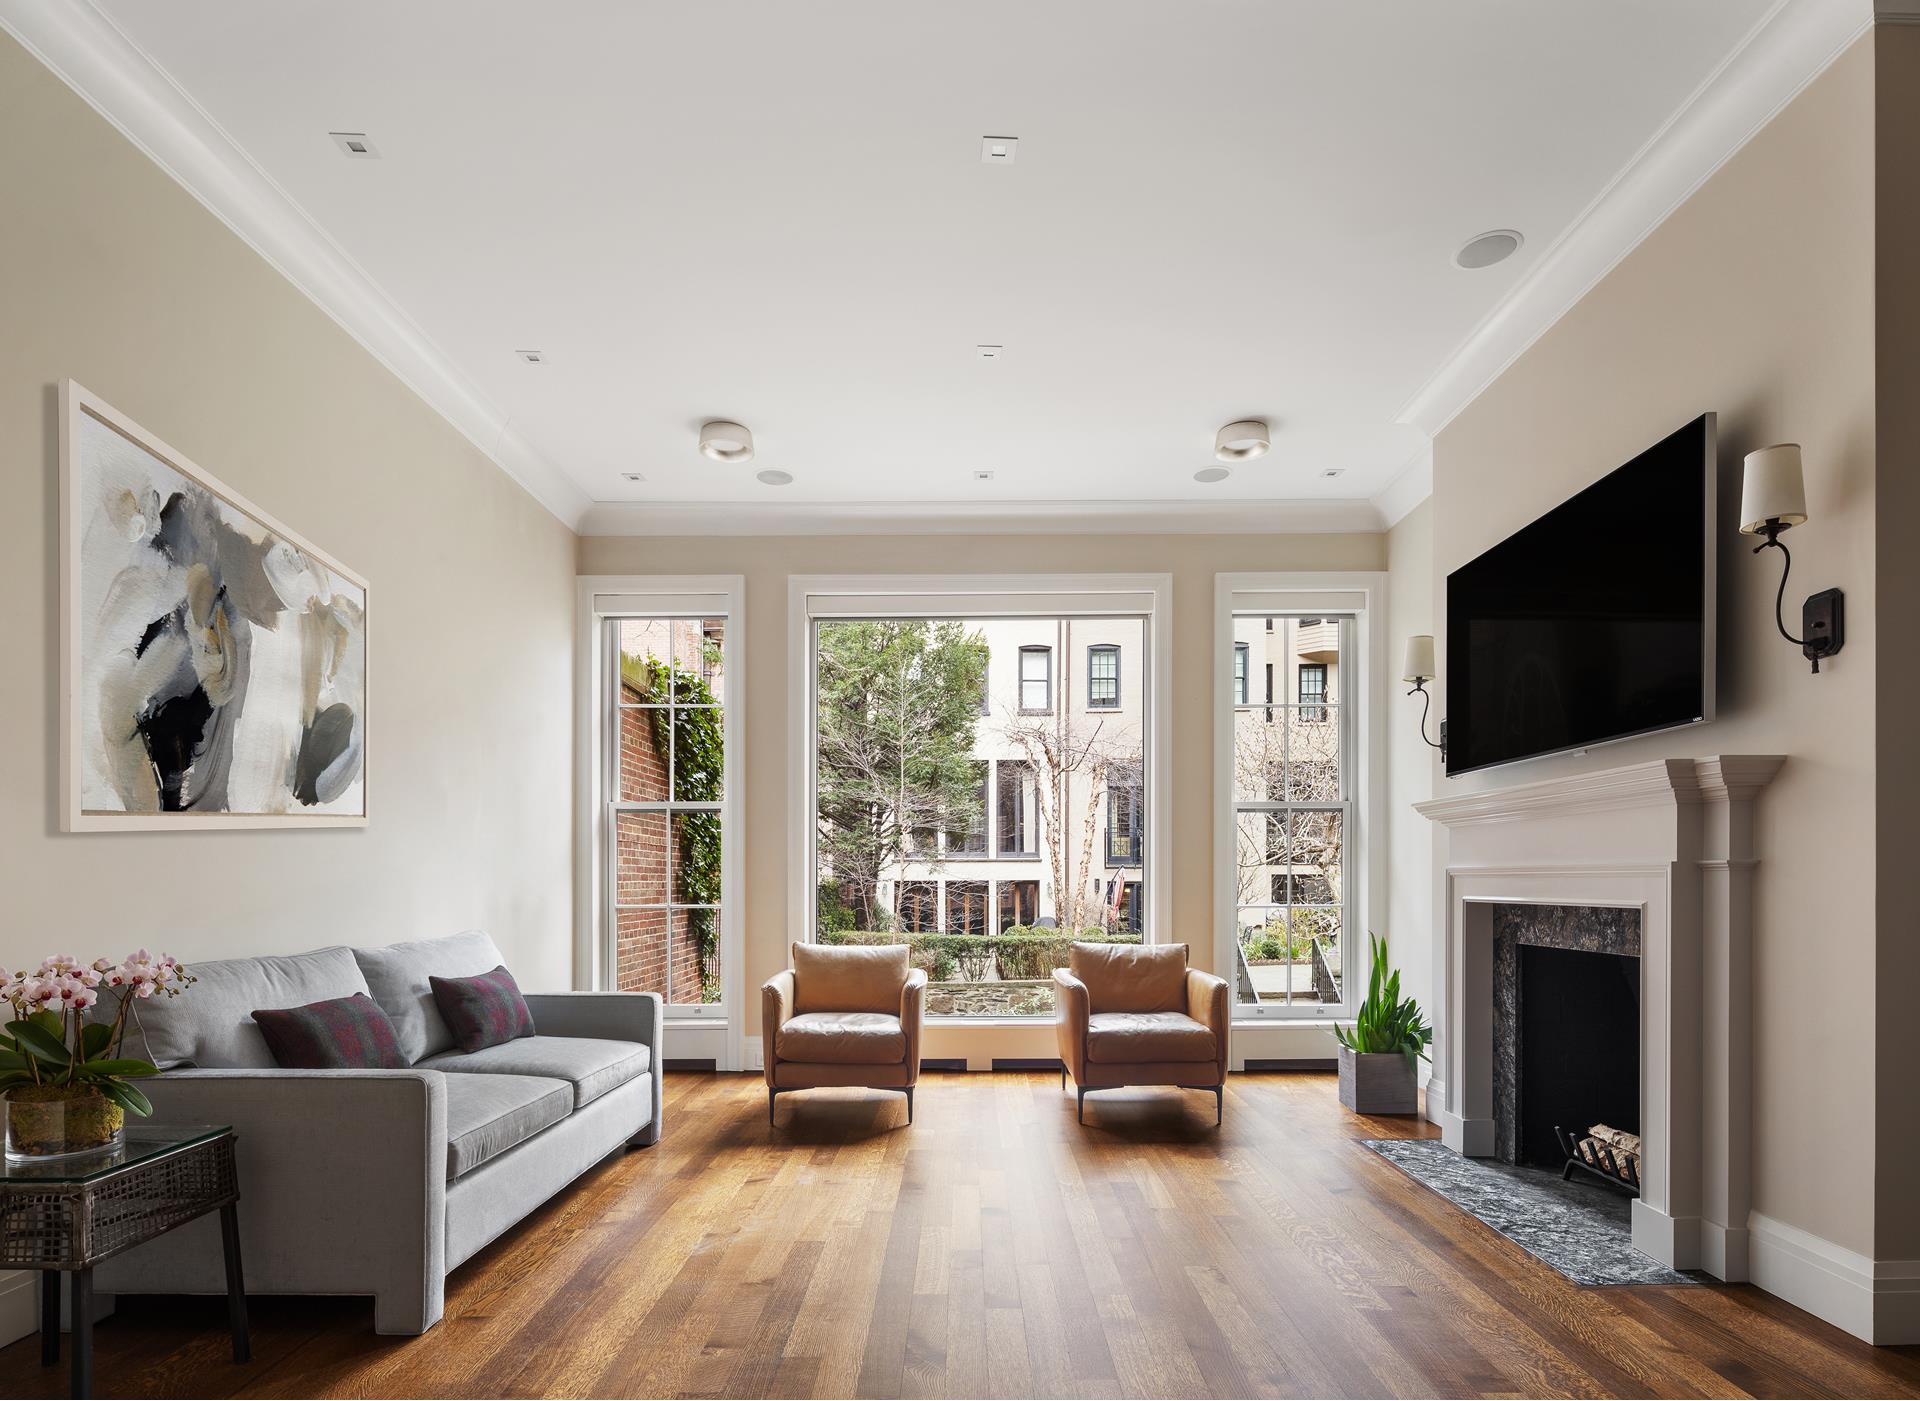 157 East 65th Street, Lenox Hill, Upper East Side, NYC - 5 Bedrooms  
4.5 Bathrooms  
10 Rooms - 